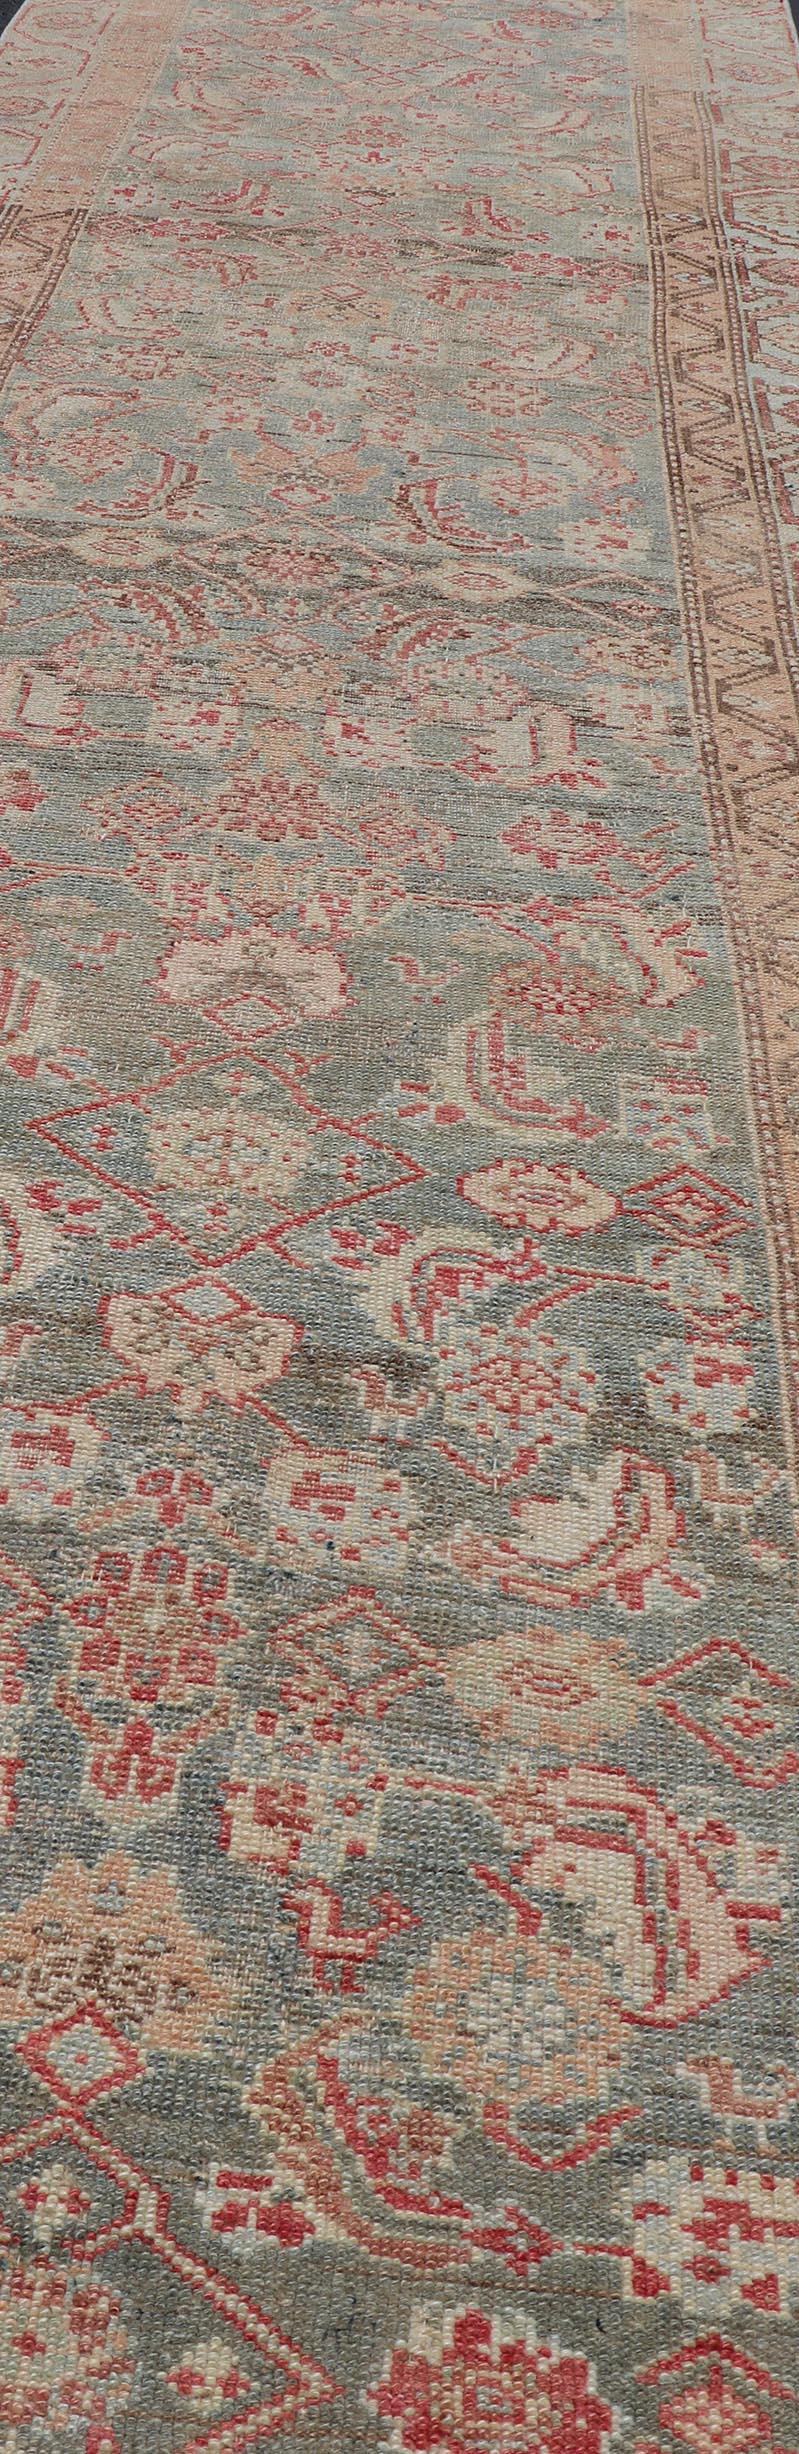 Wool Antique Persian Kurdish Runner With Sub-Geometric All Over Herati Design For Sale